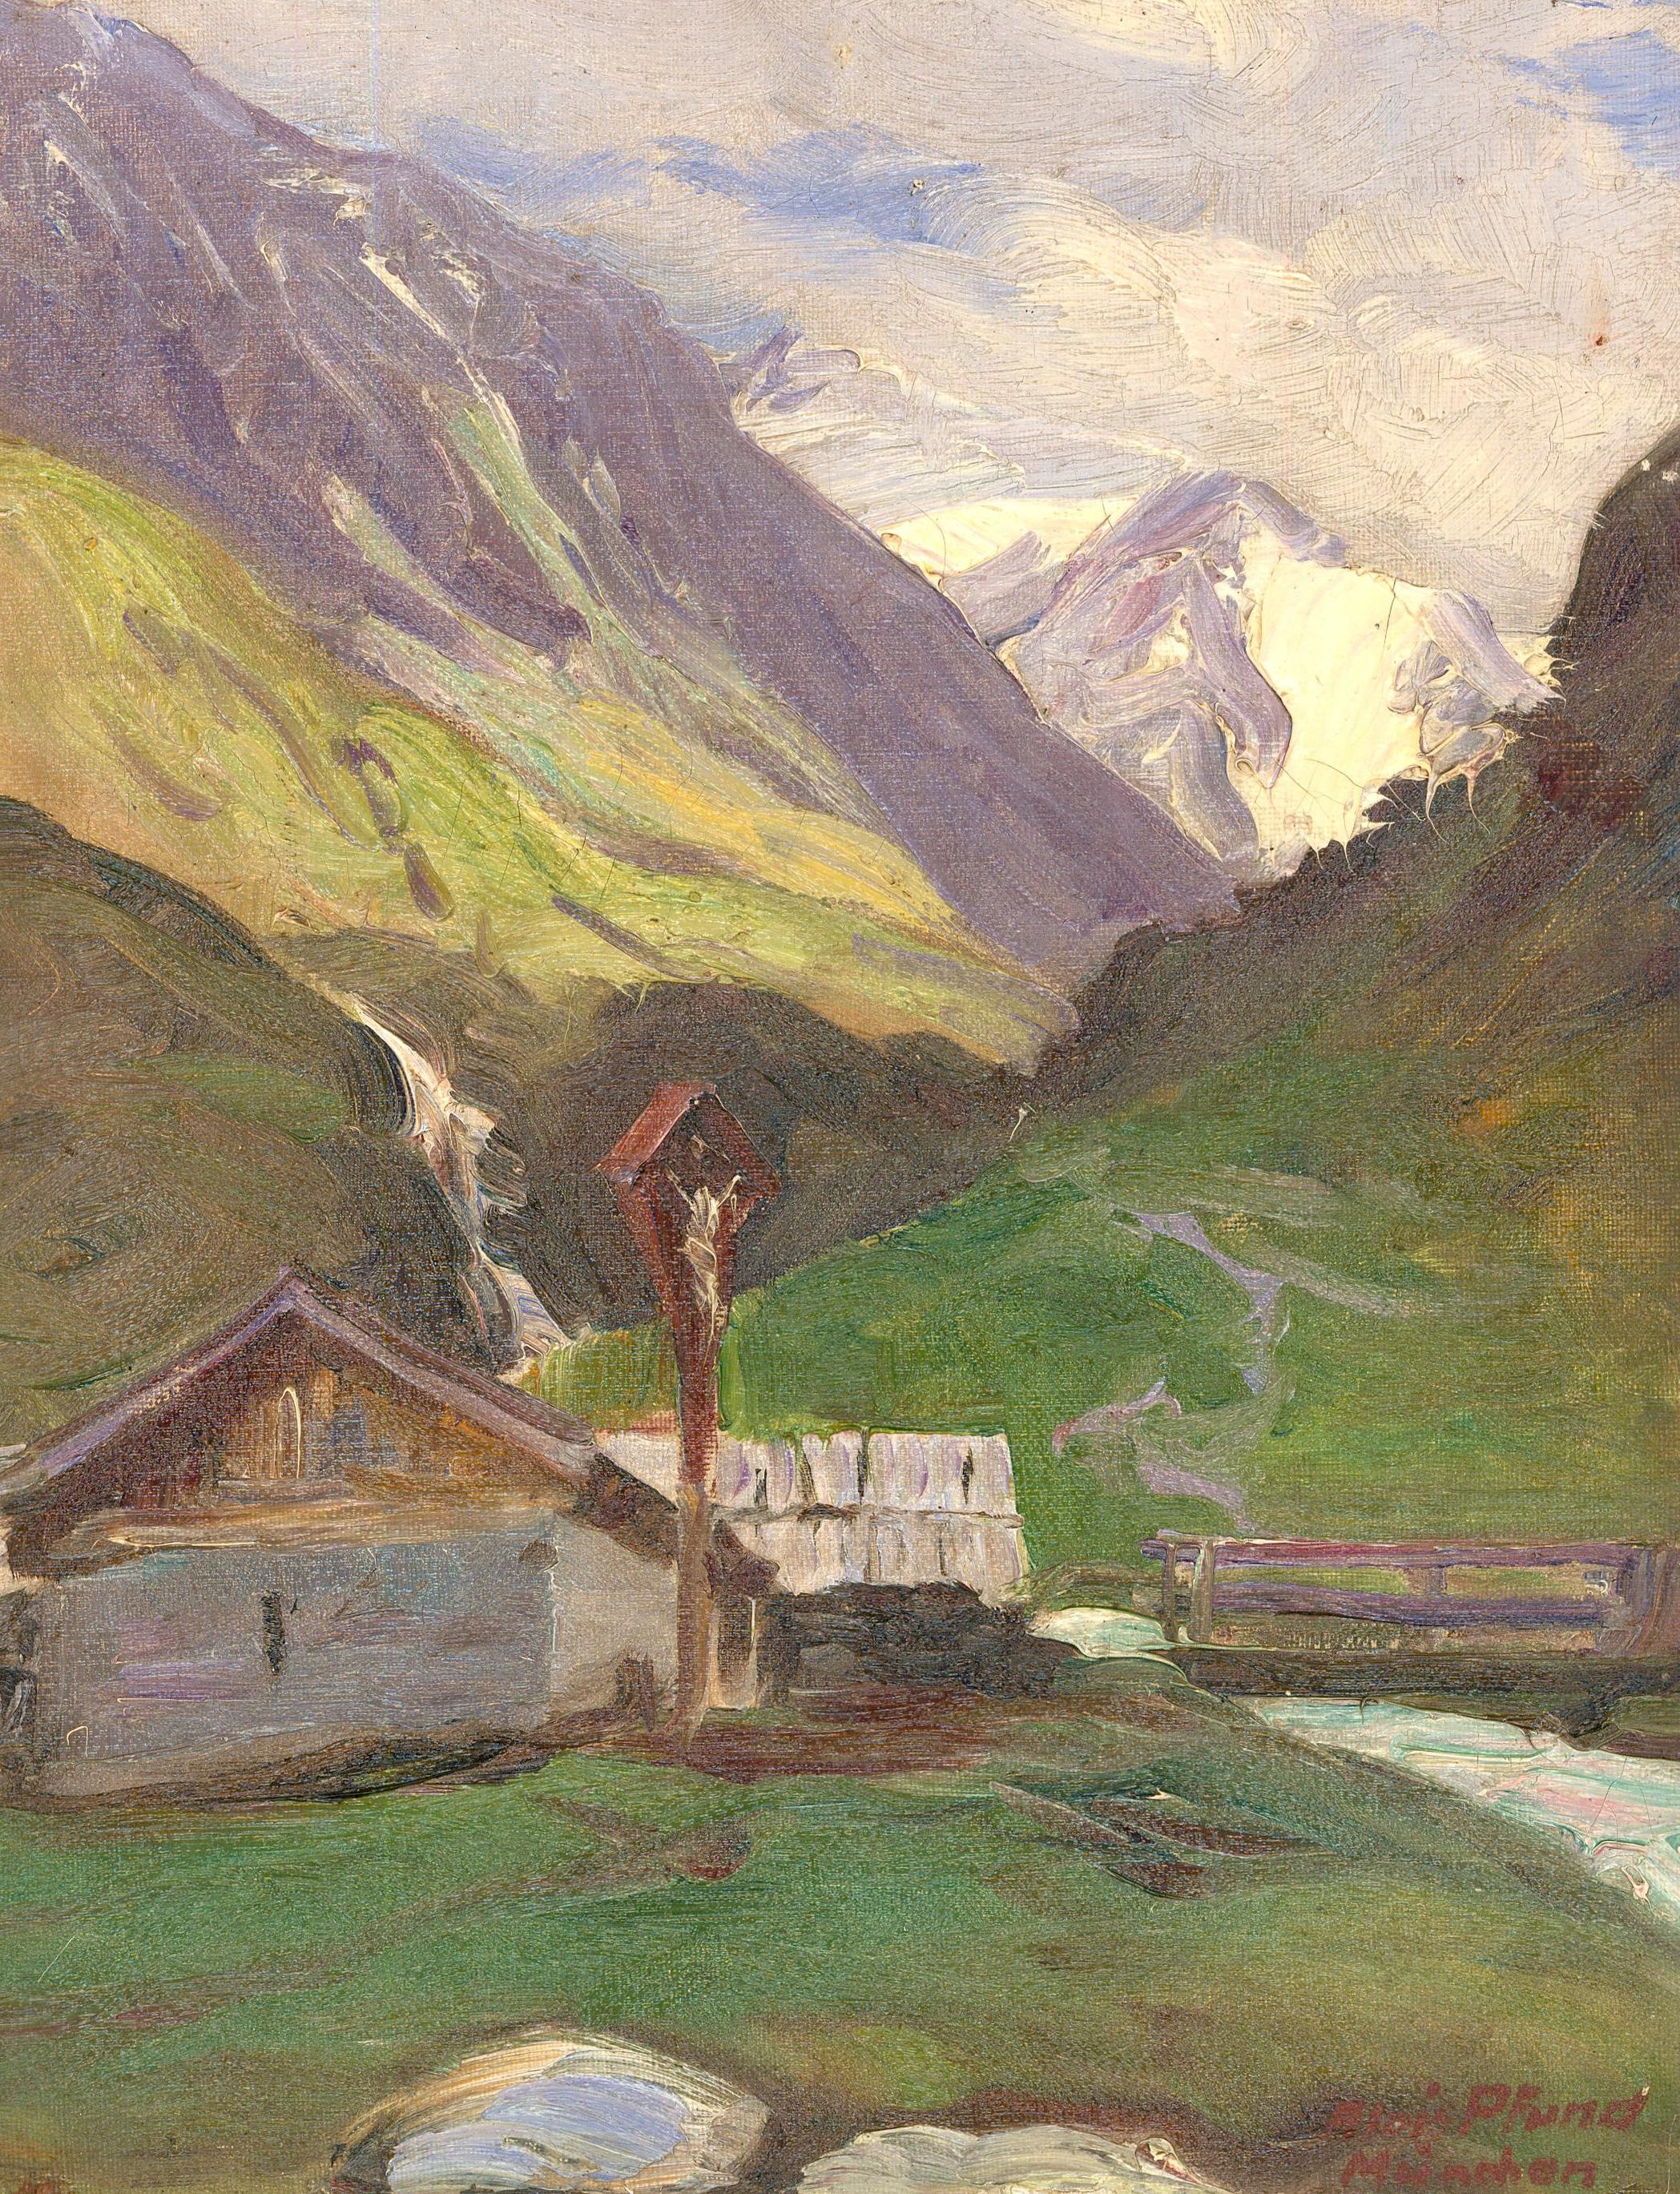 Unknown Landscape Painting - Alois Pfund (1876-1946) - Early 20th Century Oil, Mittenwald, Bavarian Alps